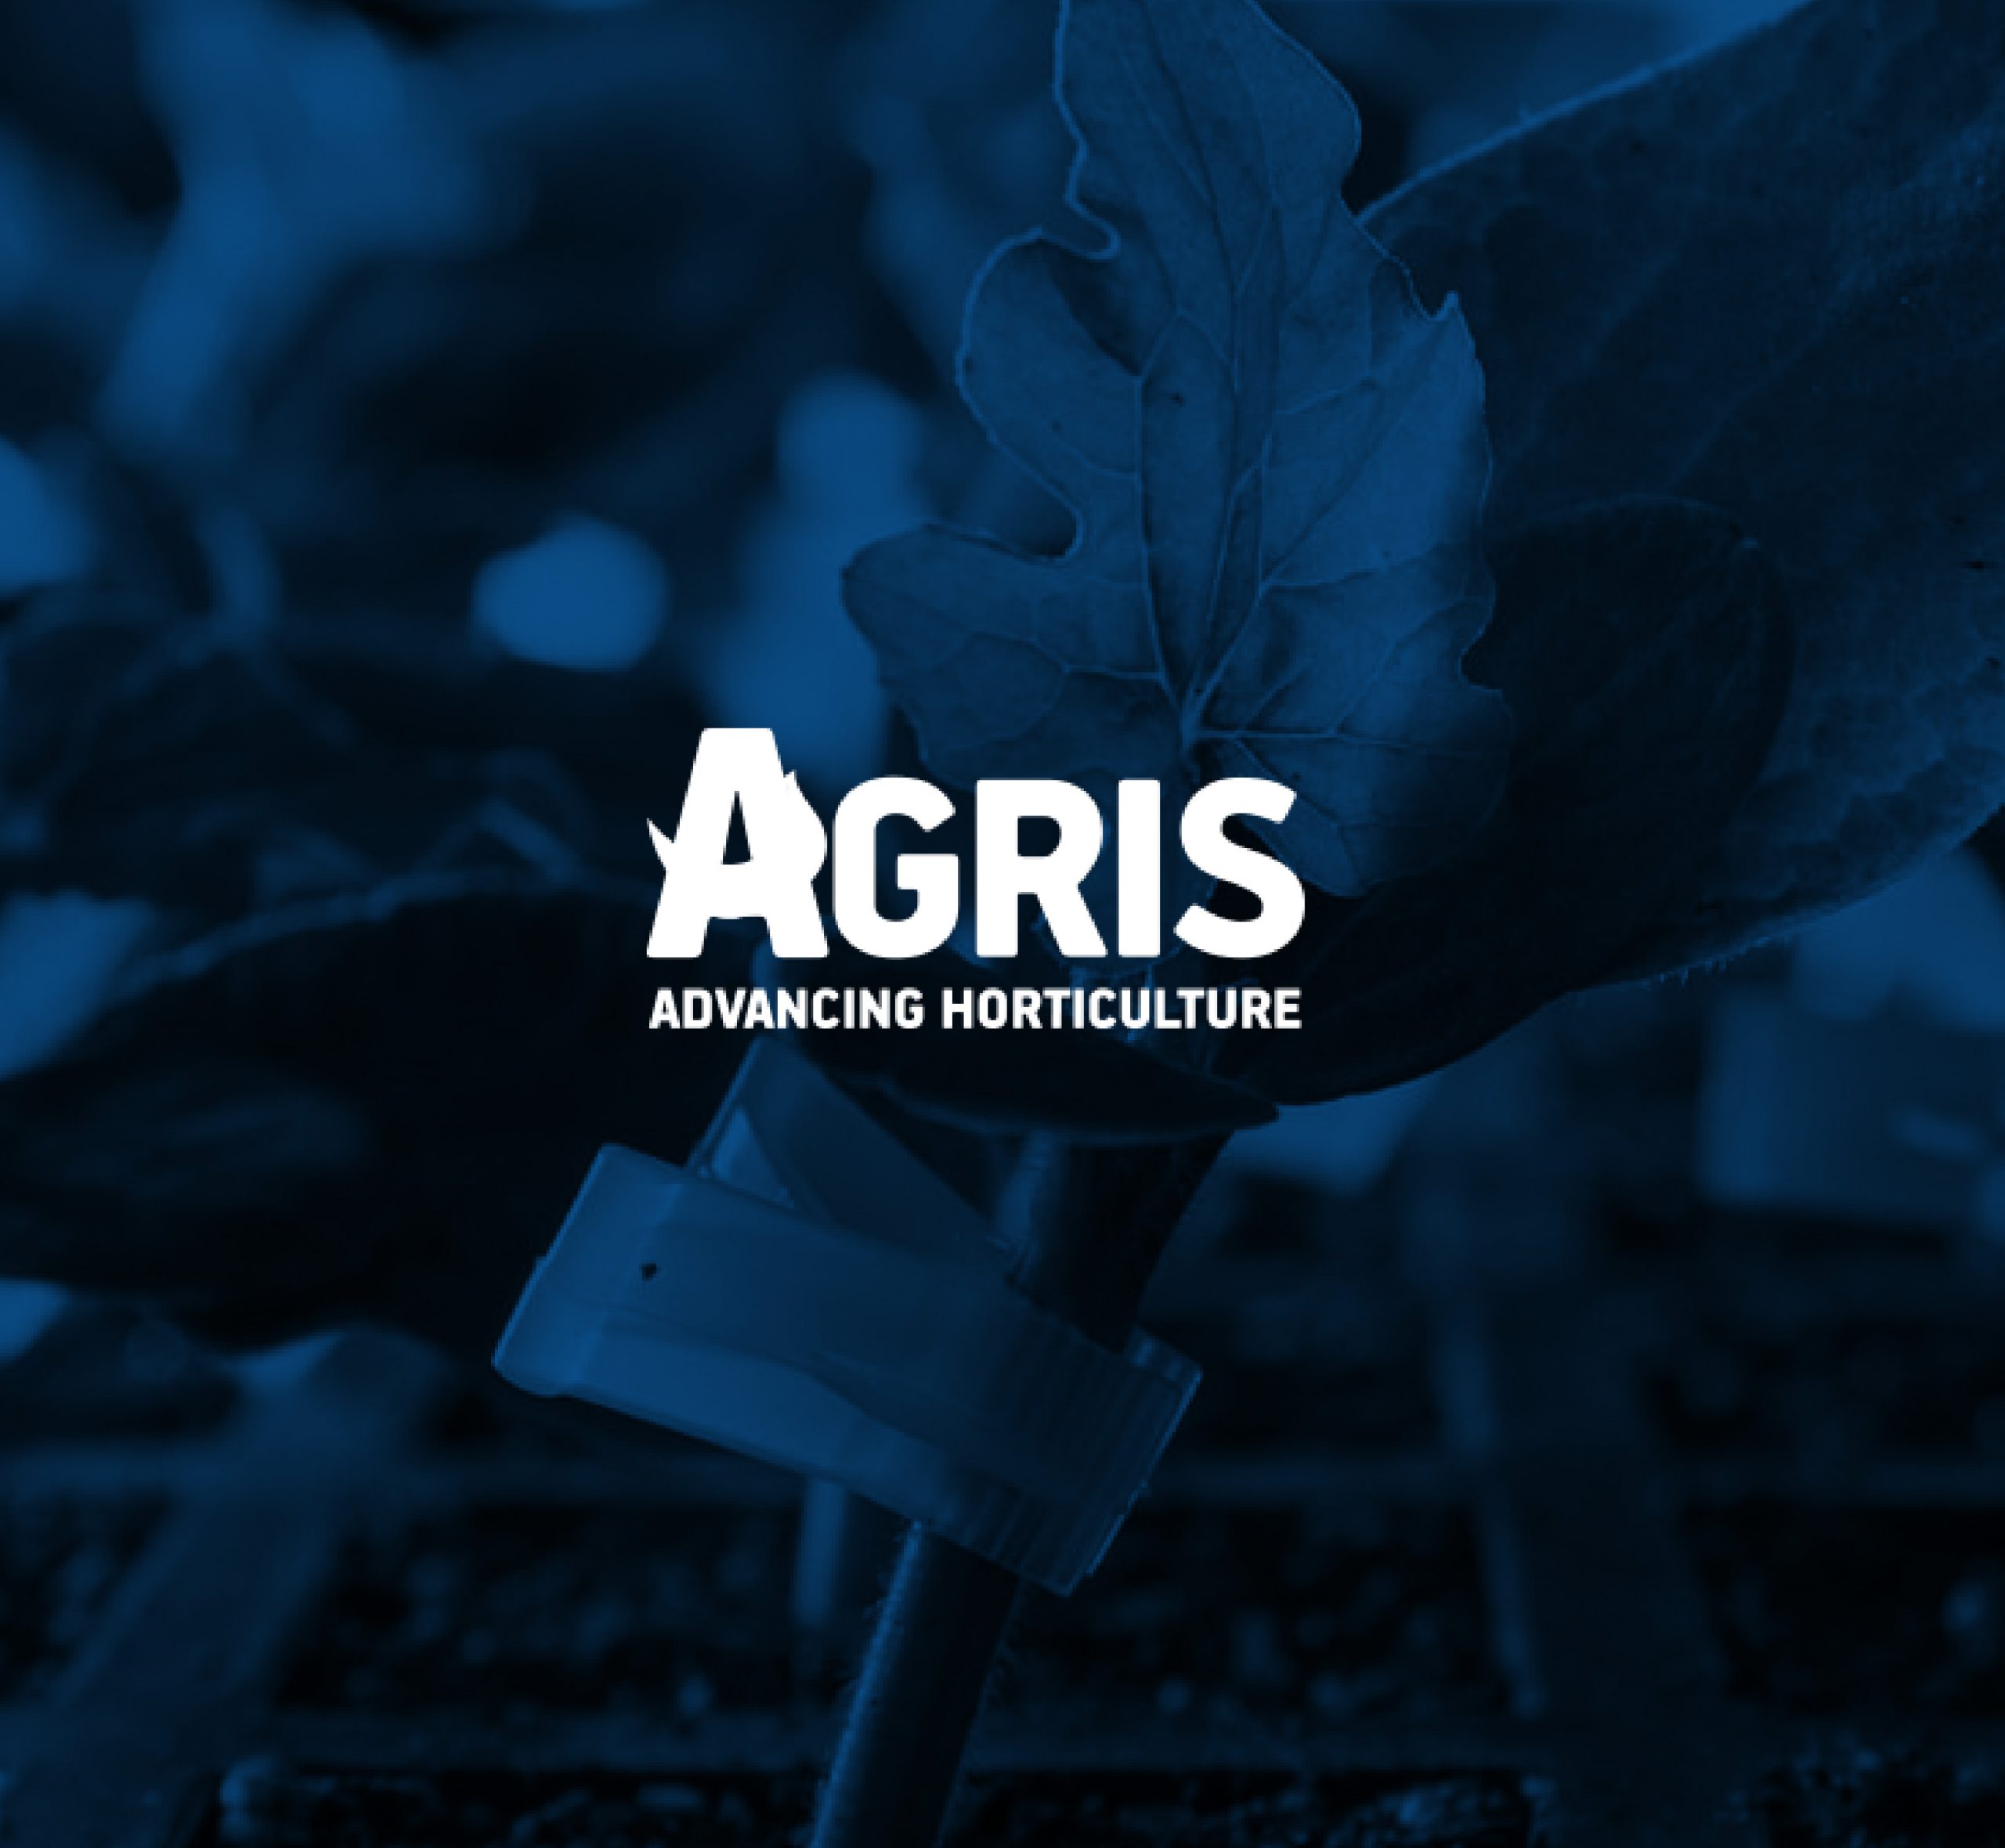 Logo of the company "AGRIS S.A."